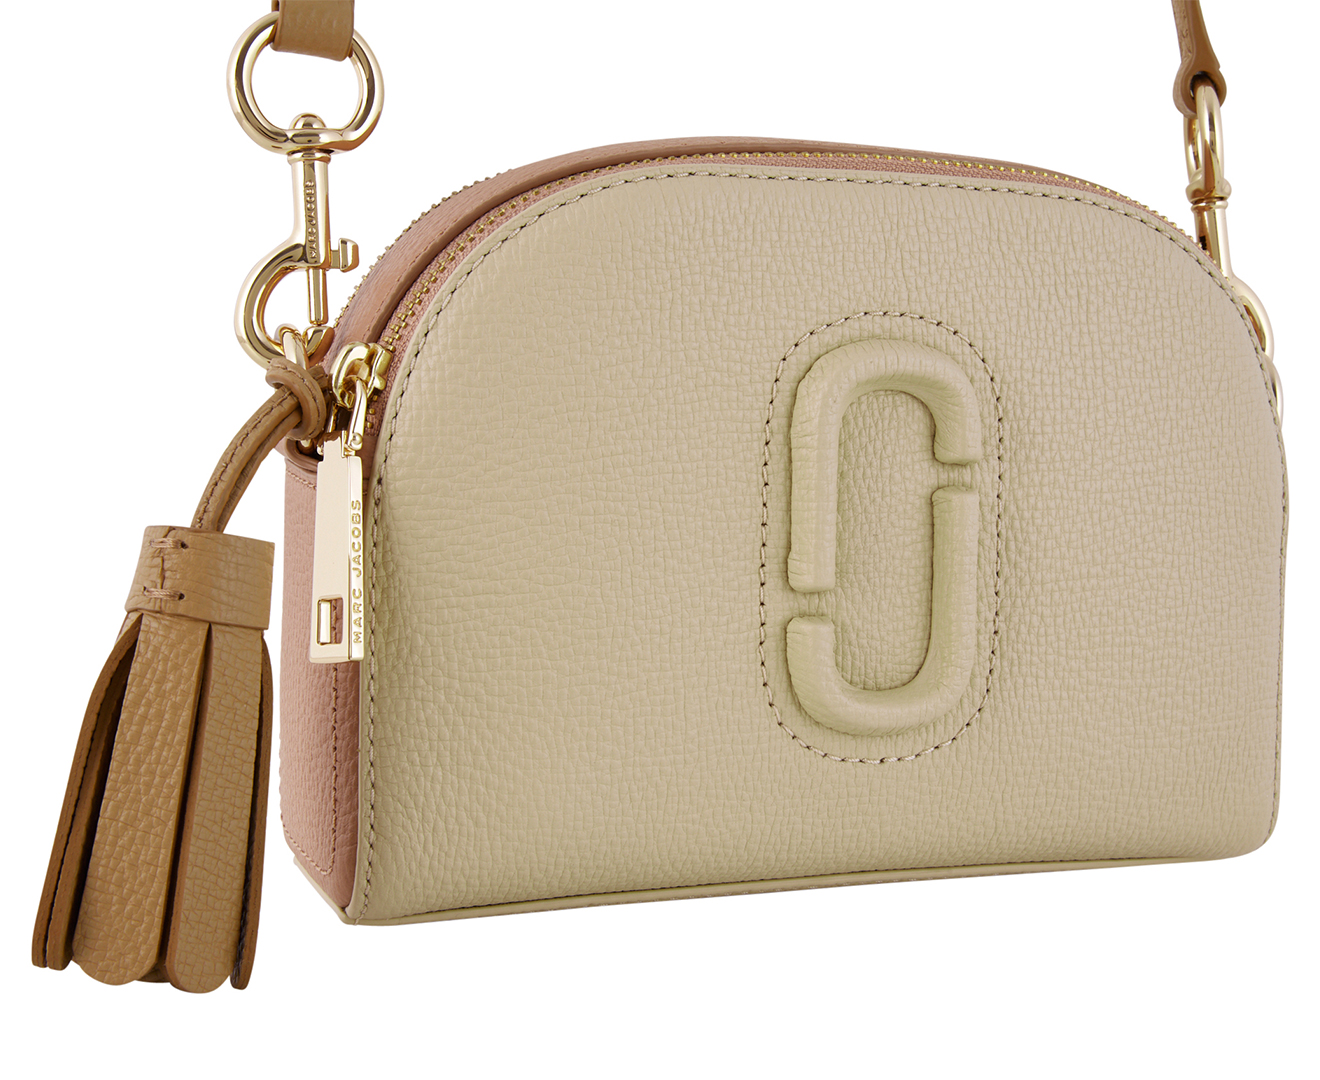 Marc Jacobs The Shutter Leather Crossbody Bag - Pebble/Multi | Catch.co.nz